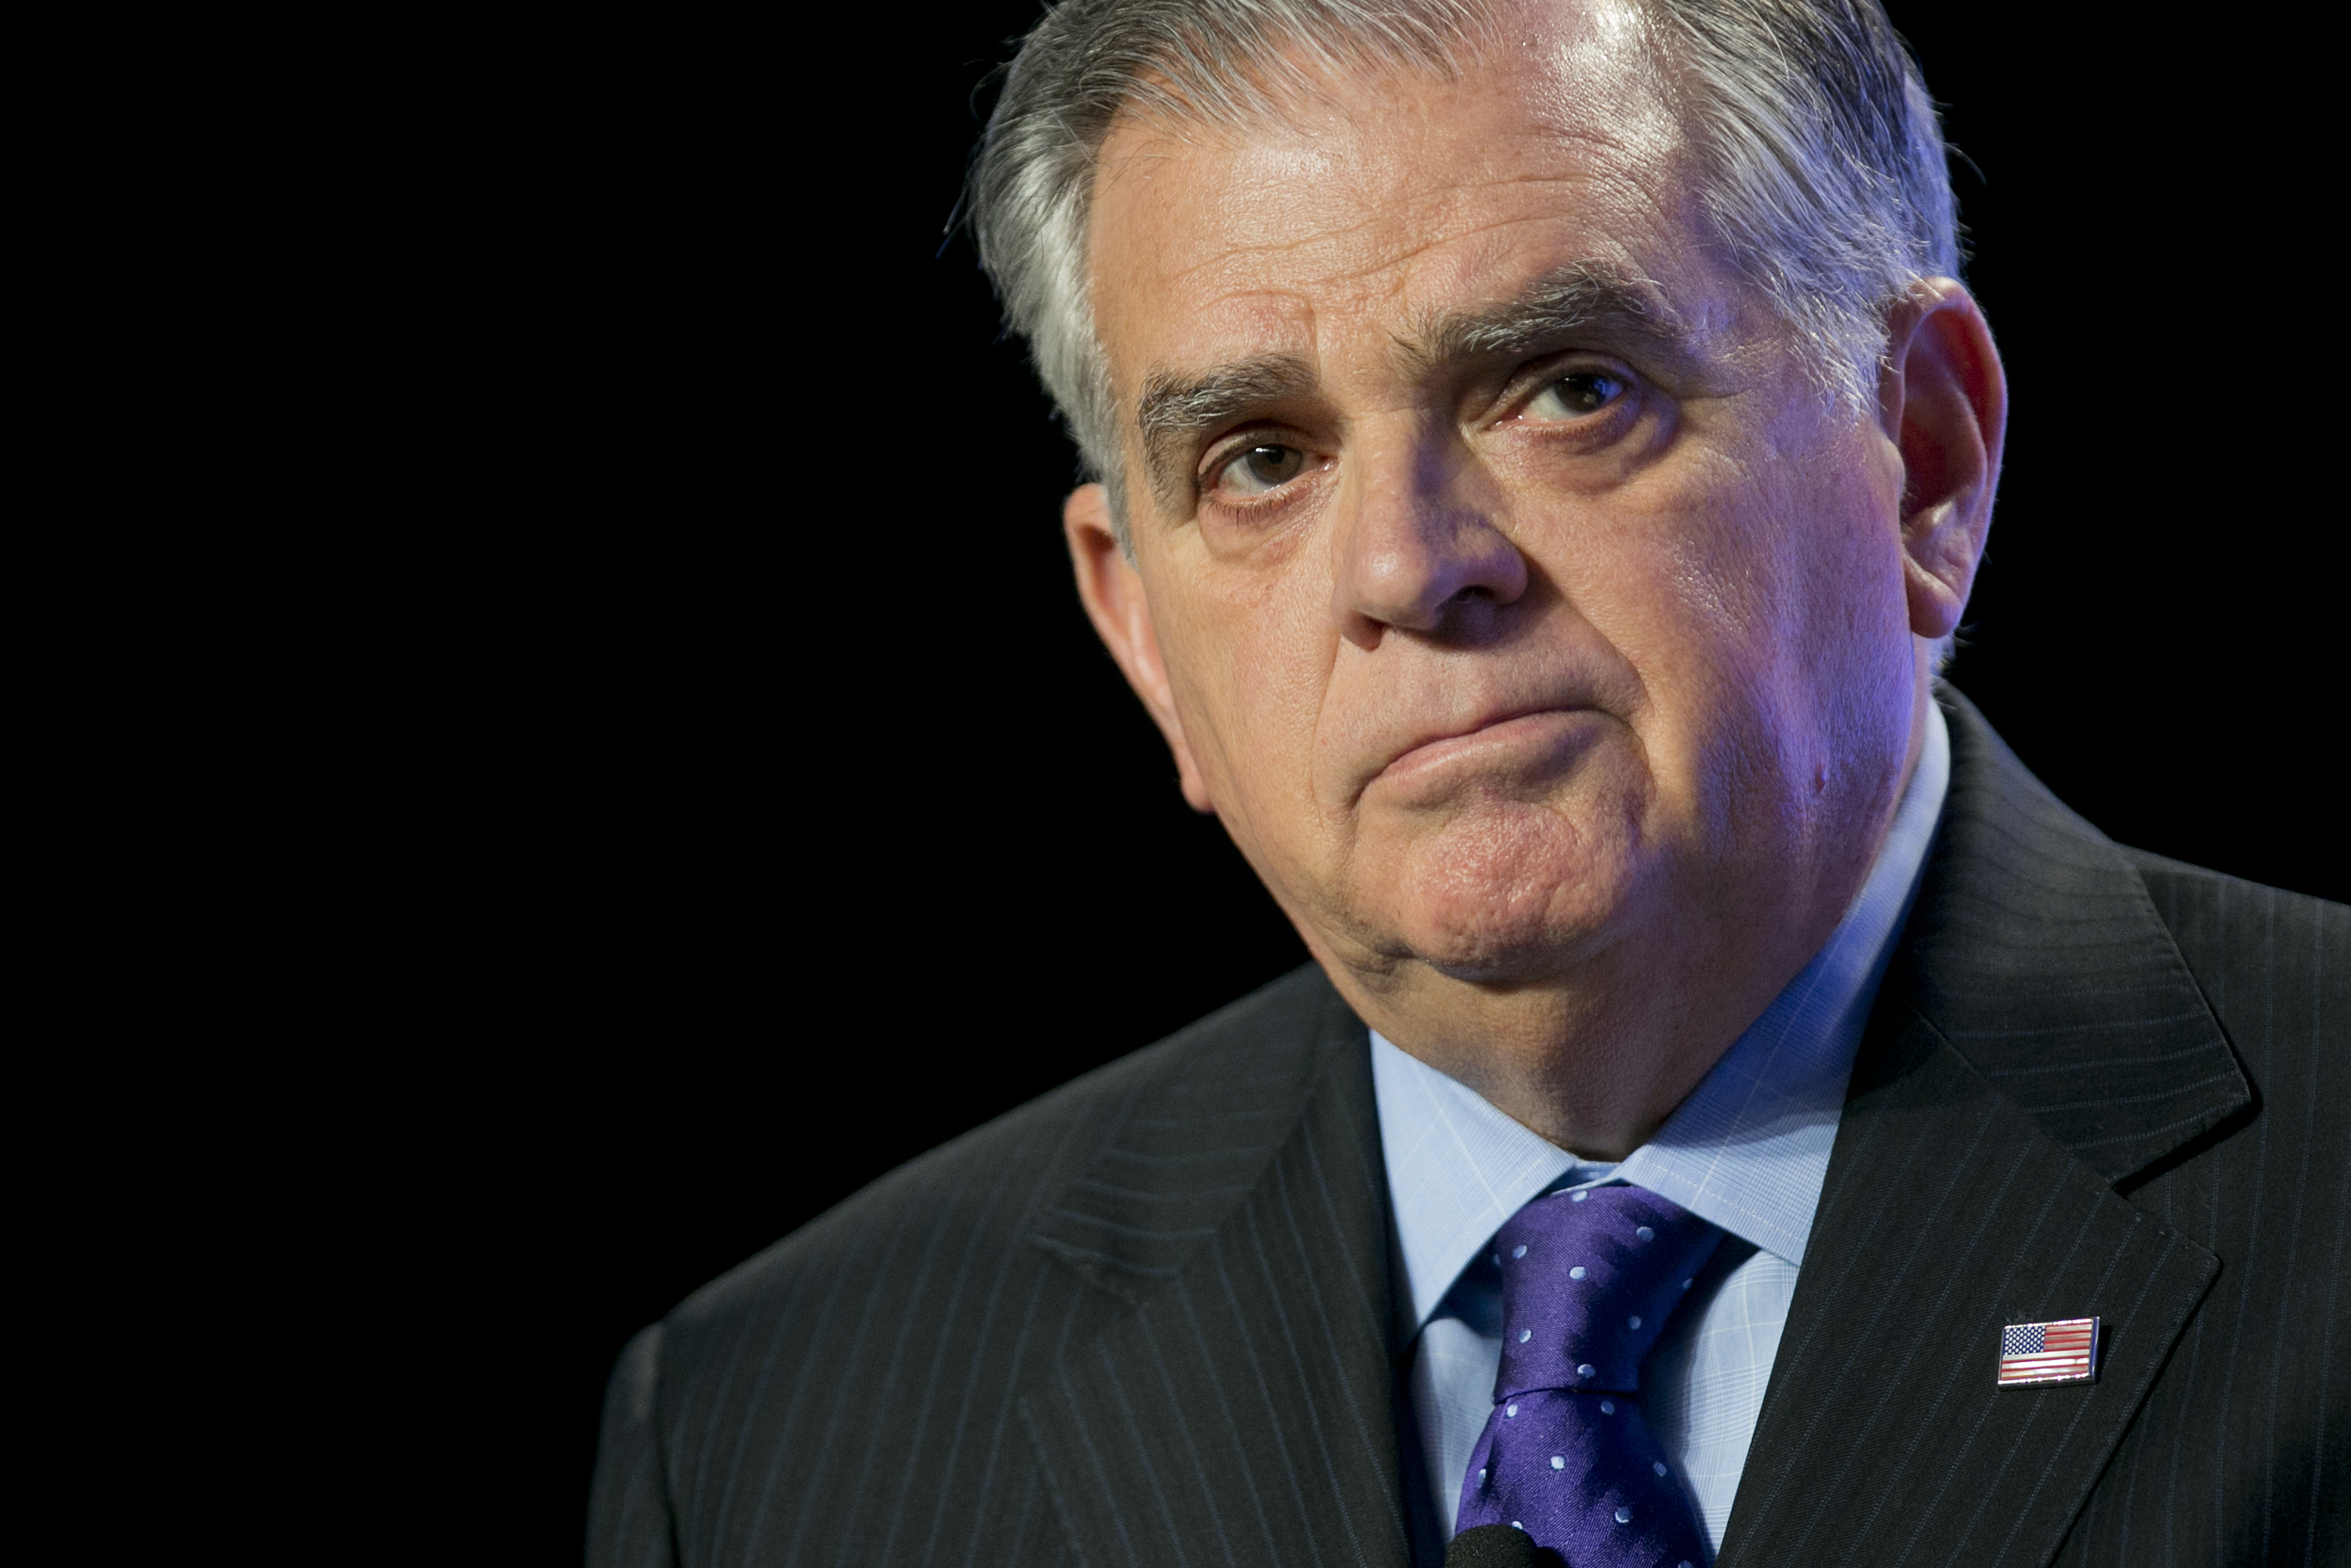 Ray LaHood pauses while speaking during the U.S. Export-Import Bank annual conference in Washington, D.C., U.S., on Friday, April 5, 2013.